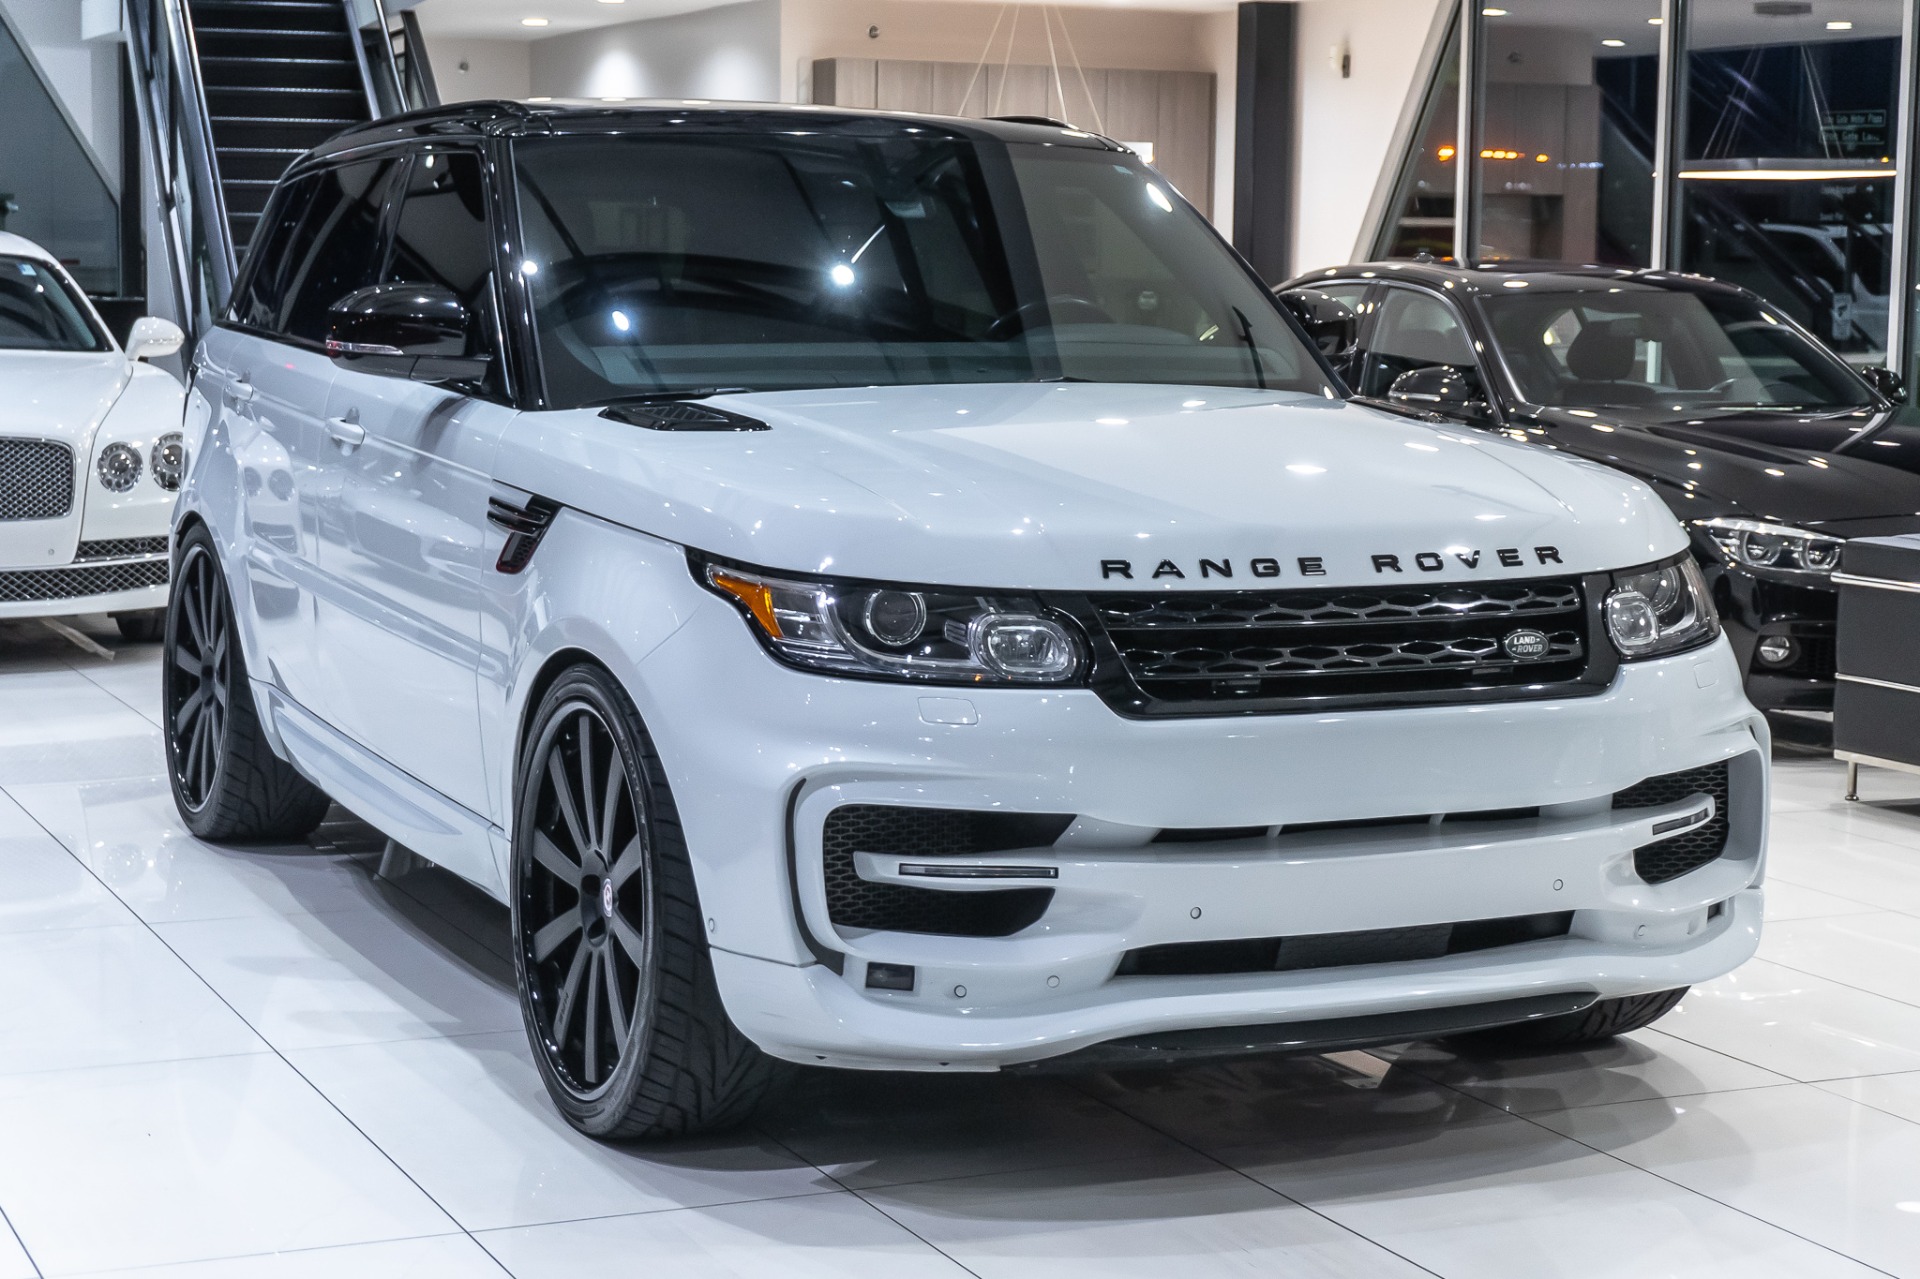 Used Rover Range Rover Sport V8 Supercharged STARTECH Kit + HRE Wheels Big $ Upgrades! For Sale (Special Pricing) | Chicago Motor Cars Stock #16813B